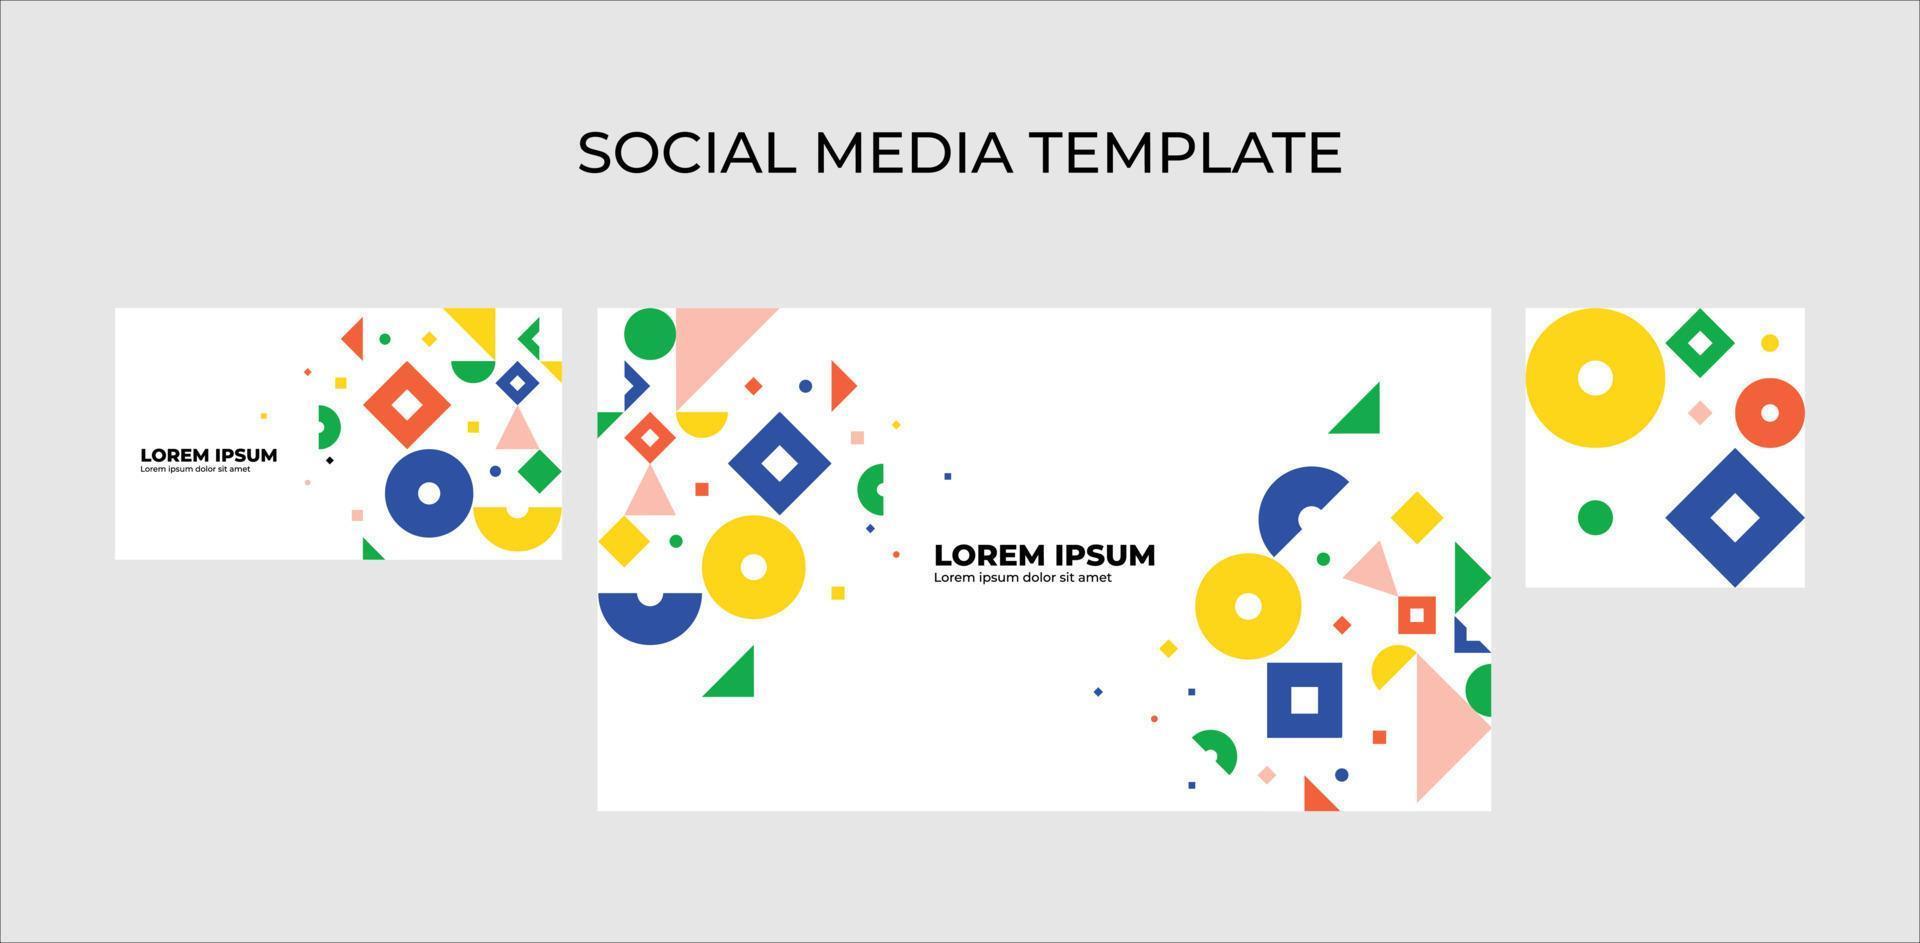 Template for the design of social networks. Minimalistic, austere, laconic design based on color geometric elements. vector